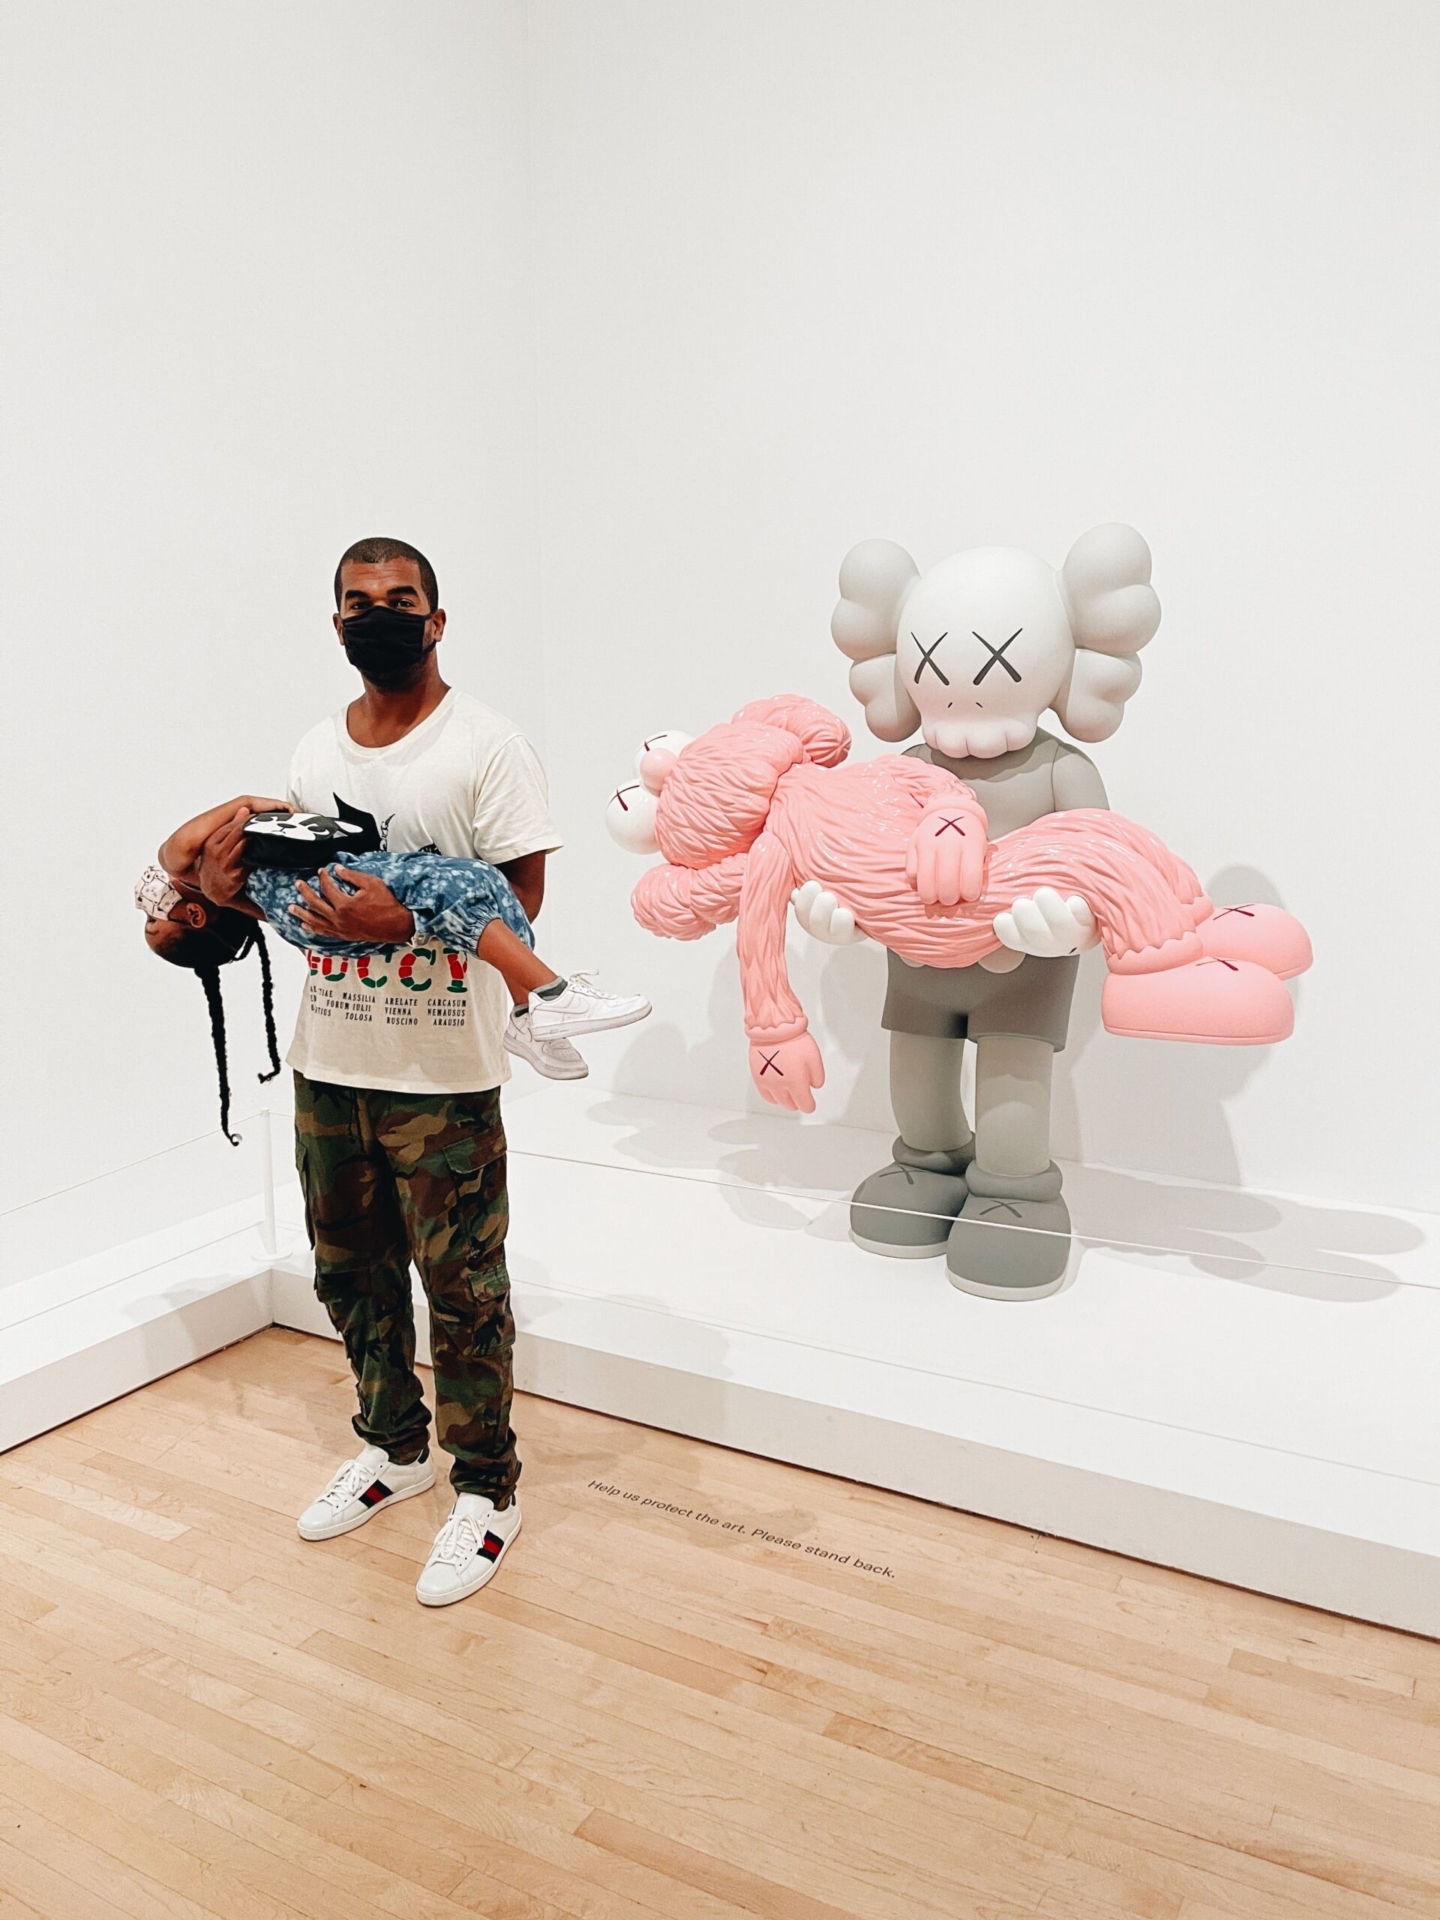 OUR VISIT TO KAWS: WHAT PARTY - In Drew's Shoes